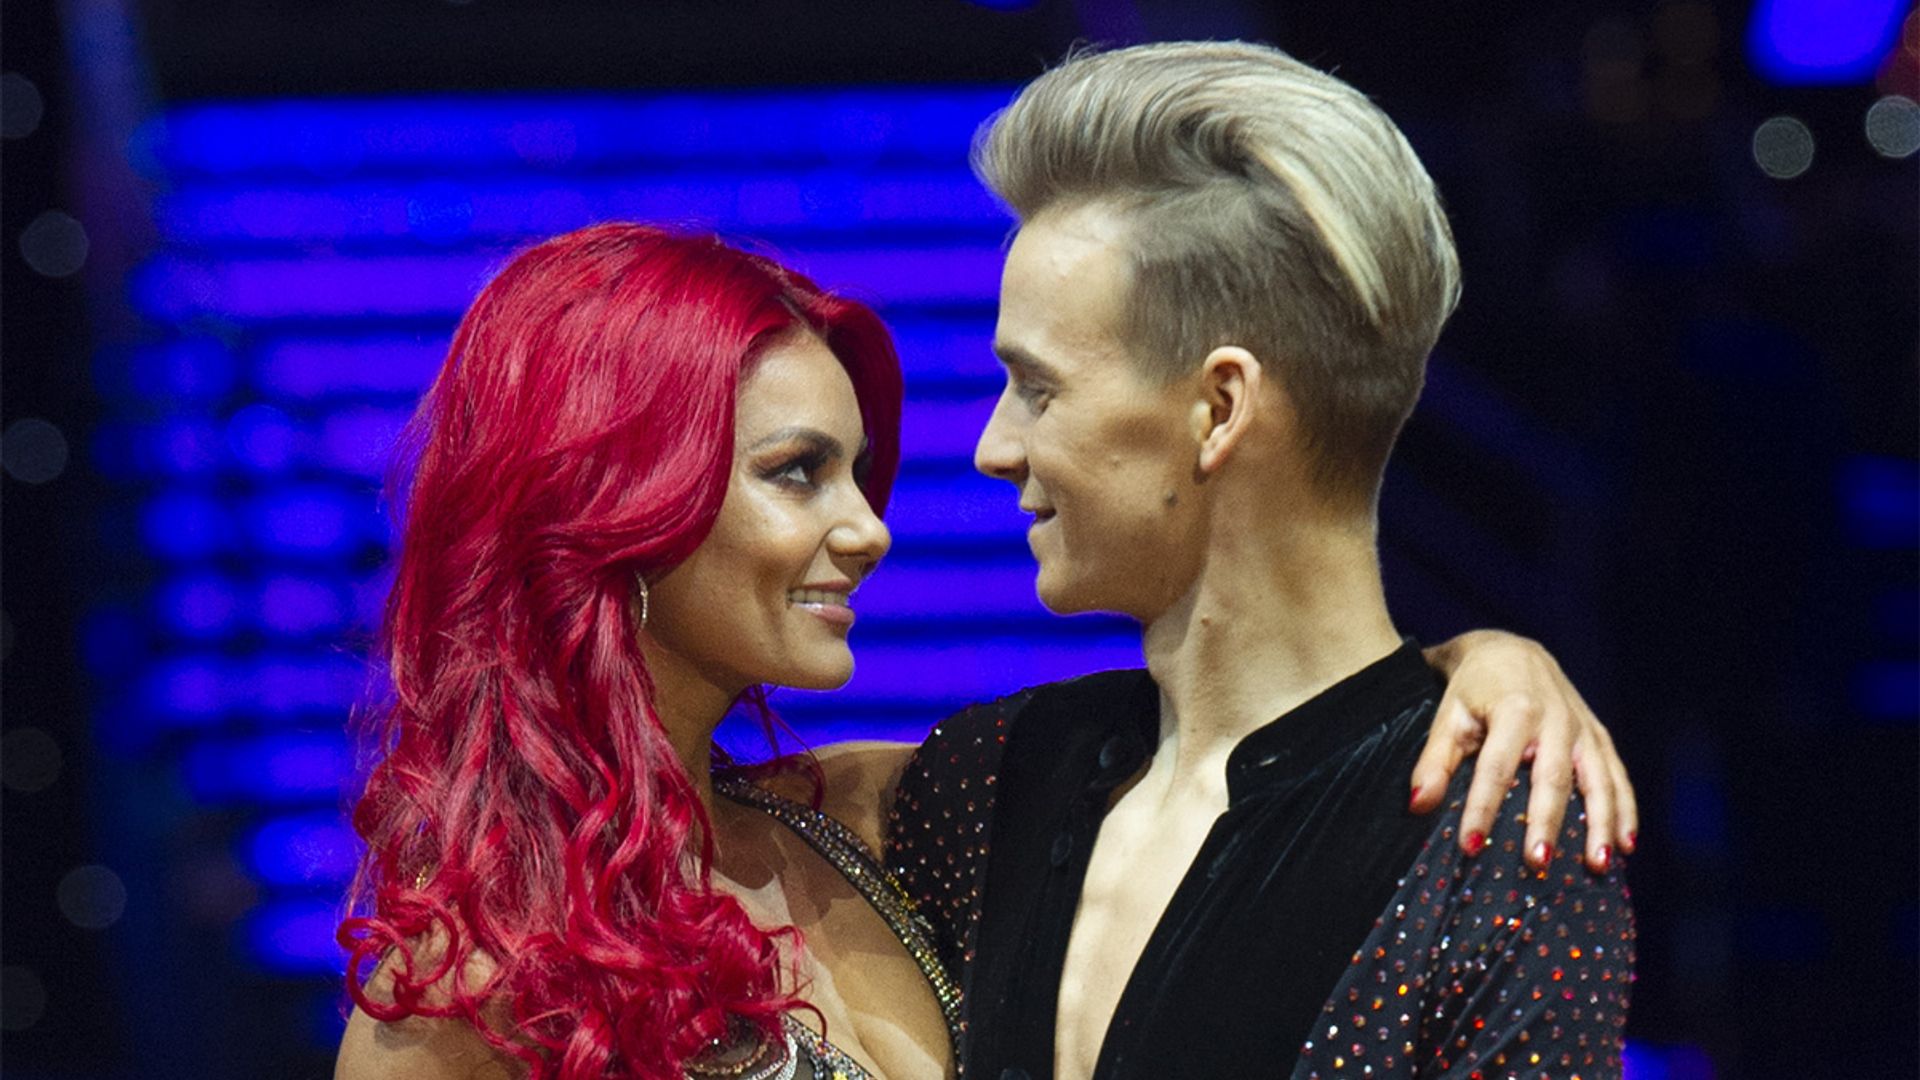 dianne buswell gushes over joe sugg